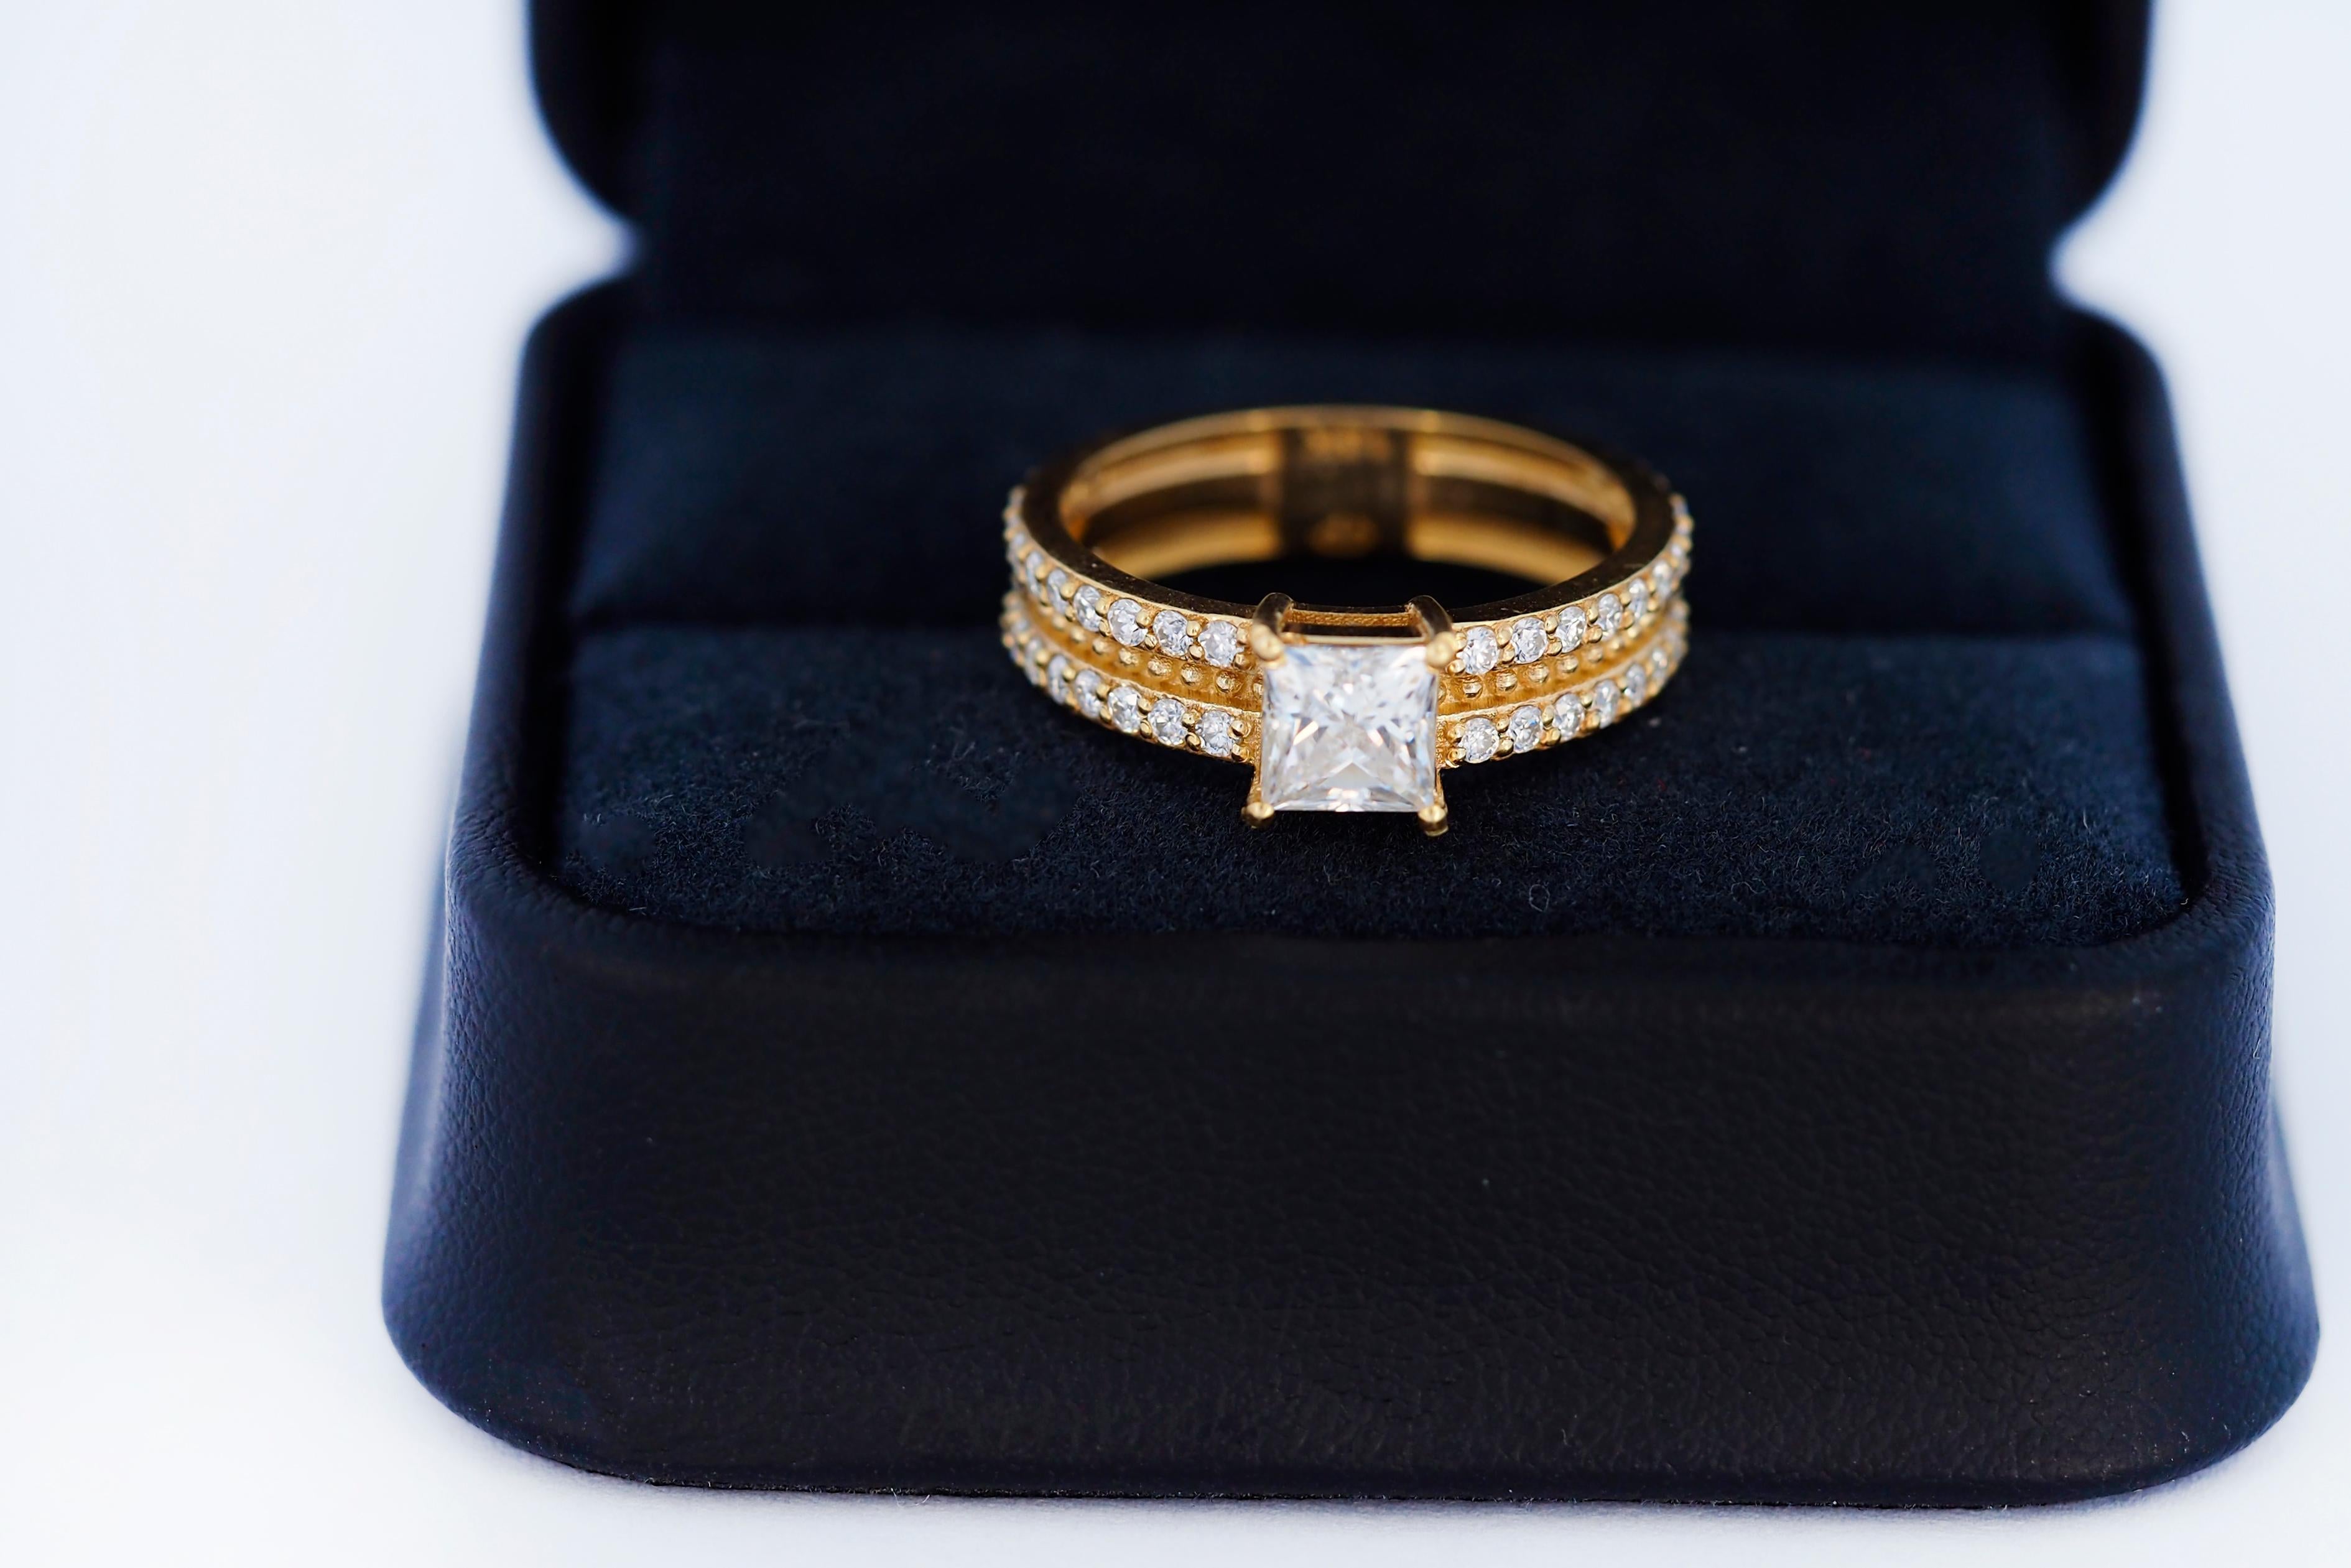 For Sale:  0.5 ct princess moissanite engagement ring in 14k gold.  3